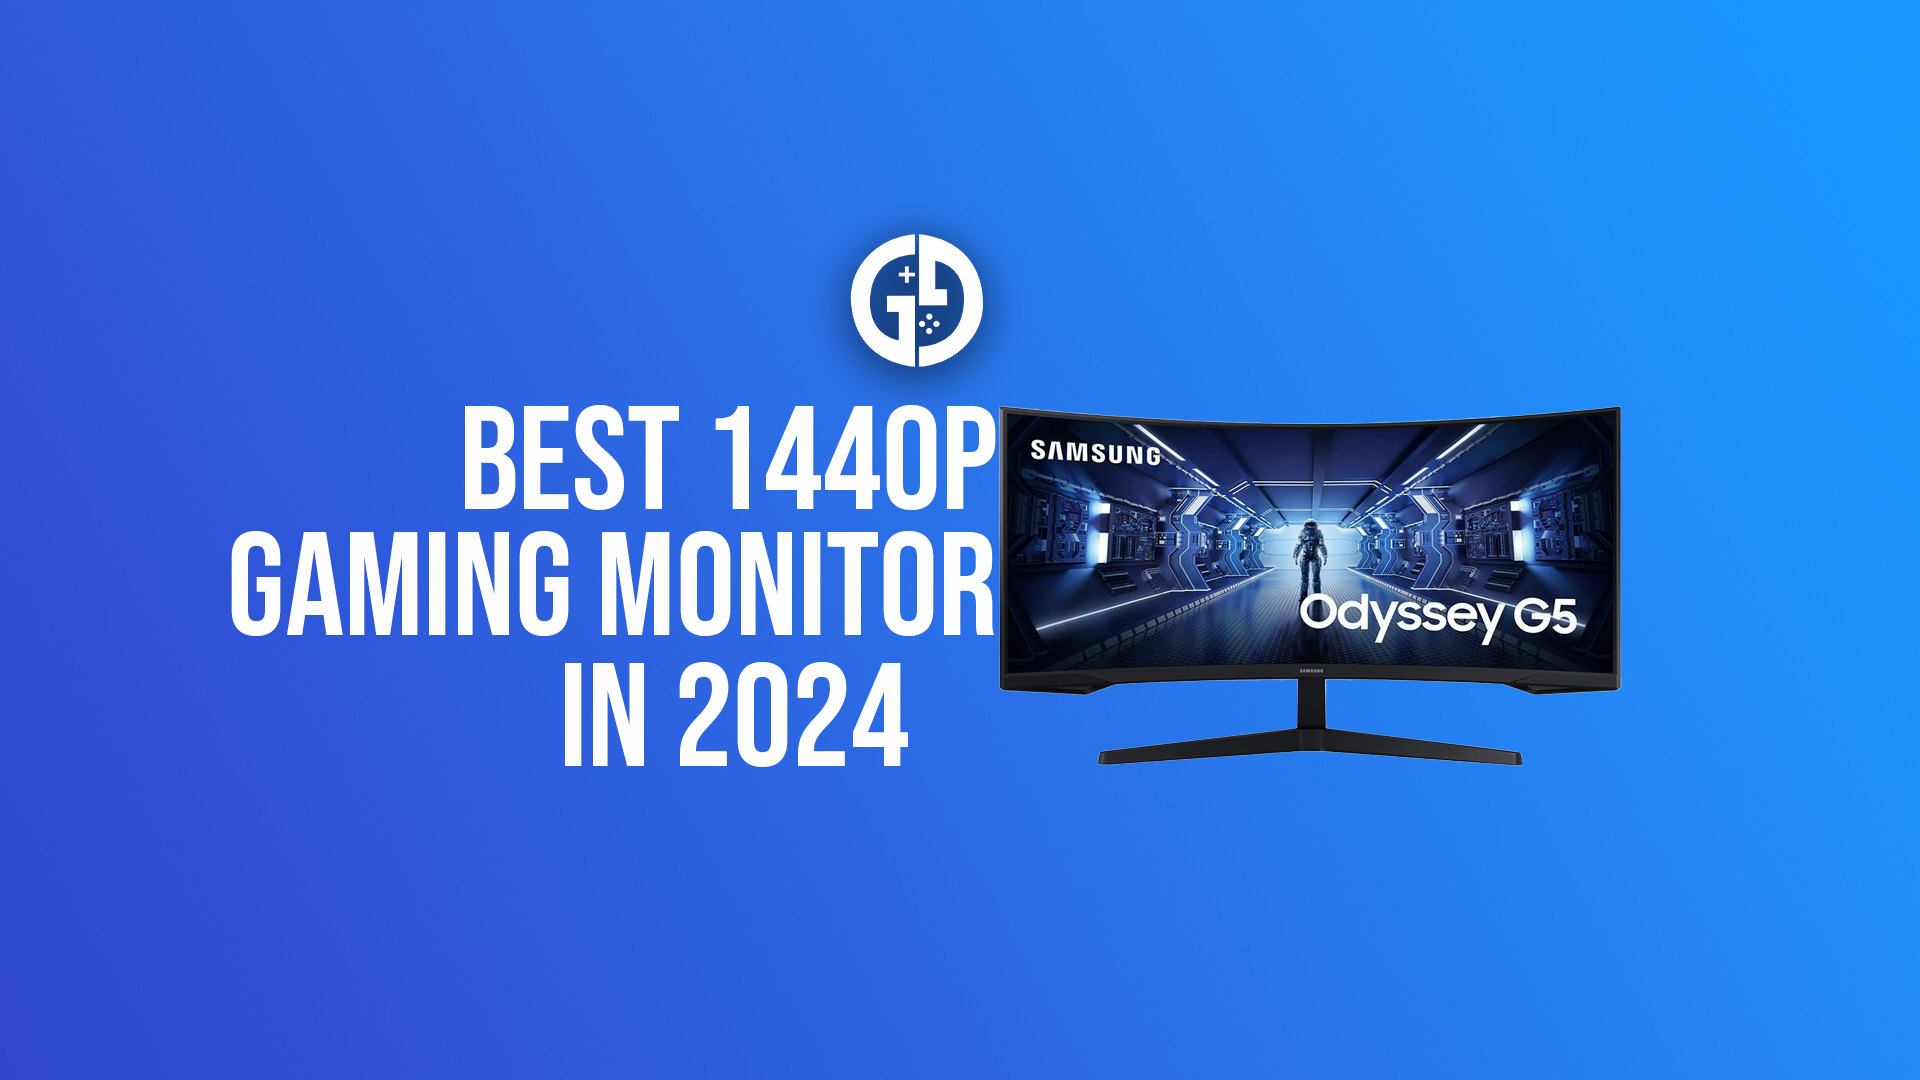 5 best 1440p gaming monitors in 2024, Budget, 240Hz, OLED & more